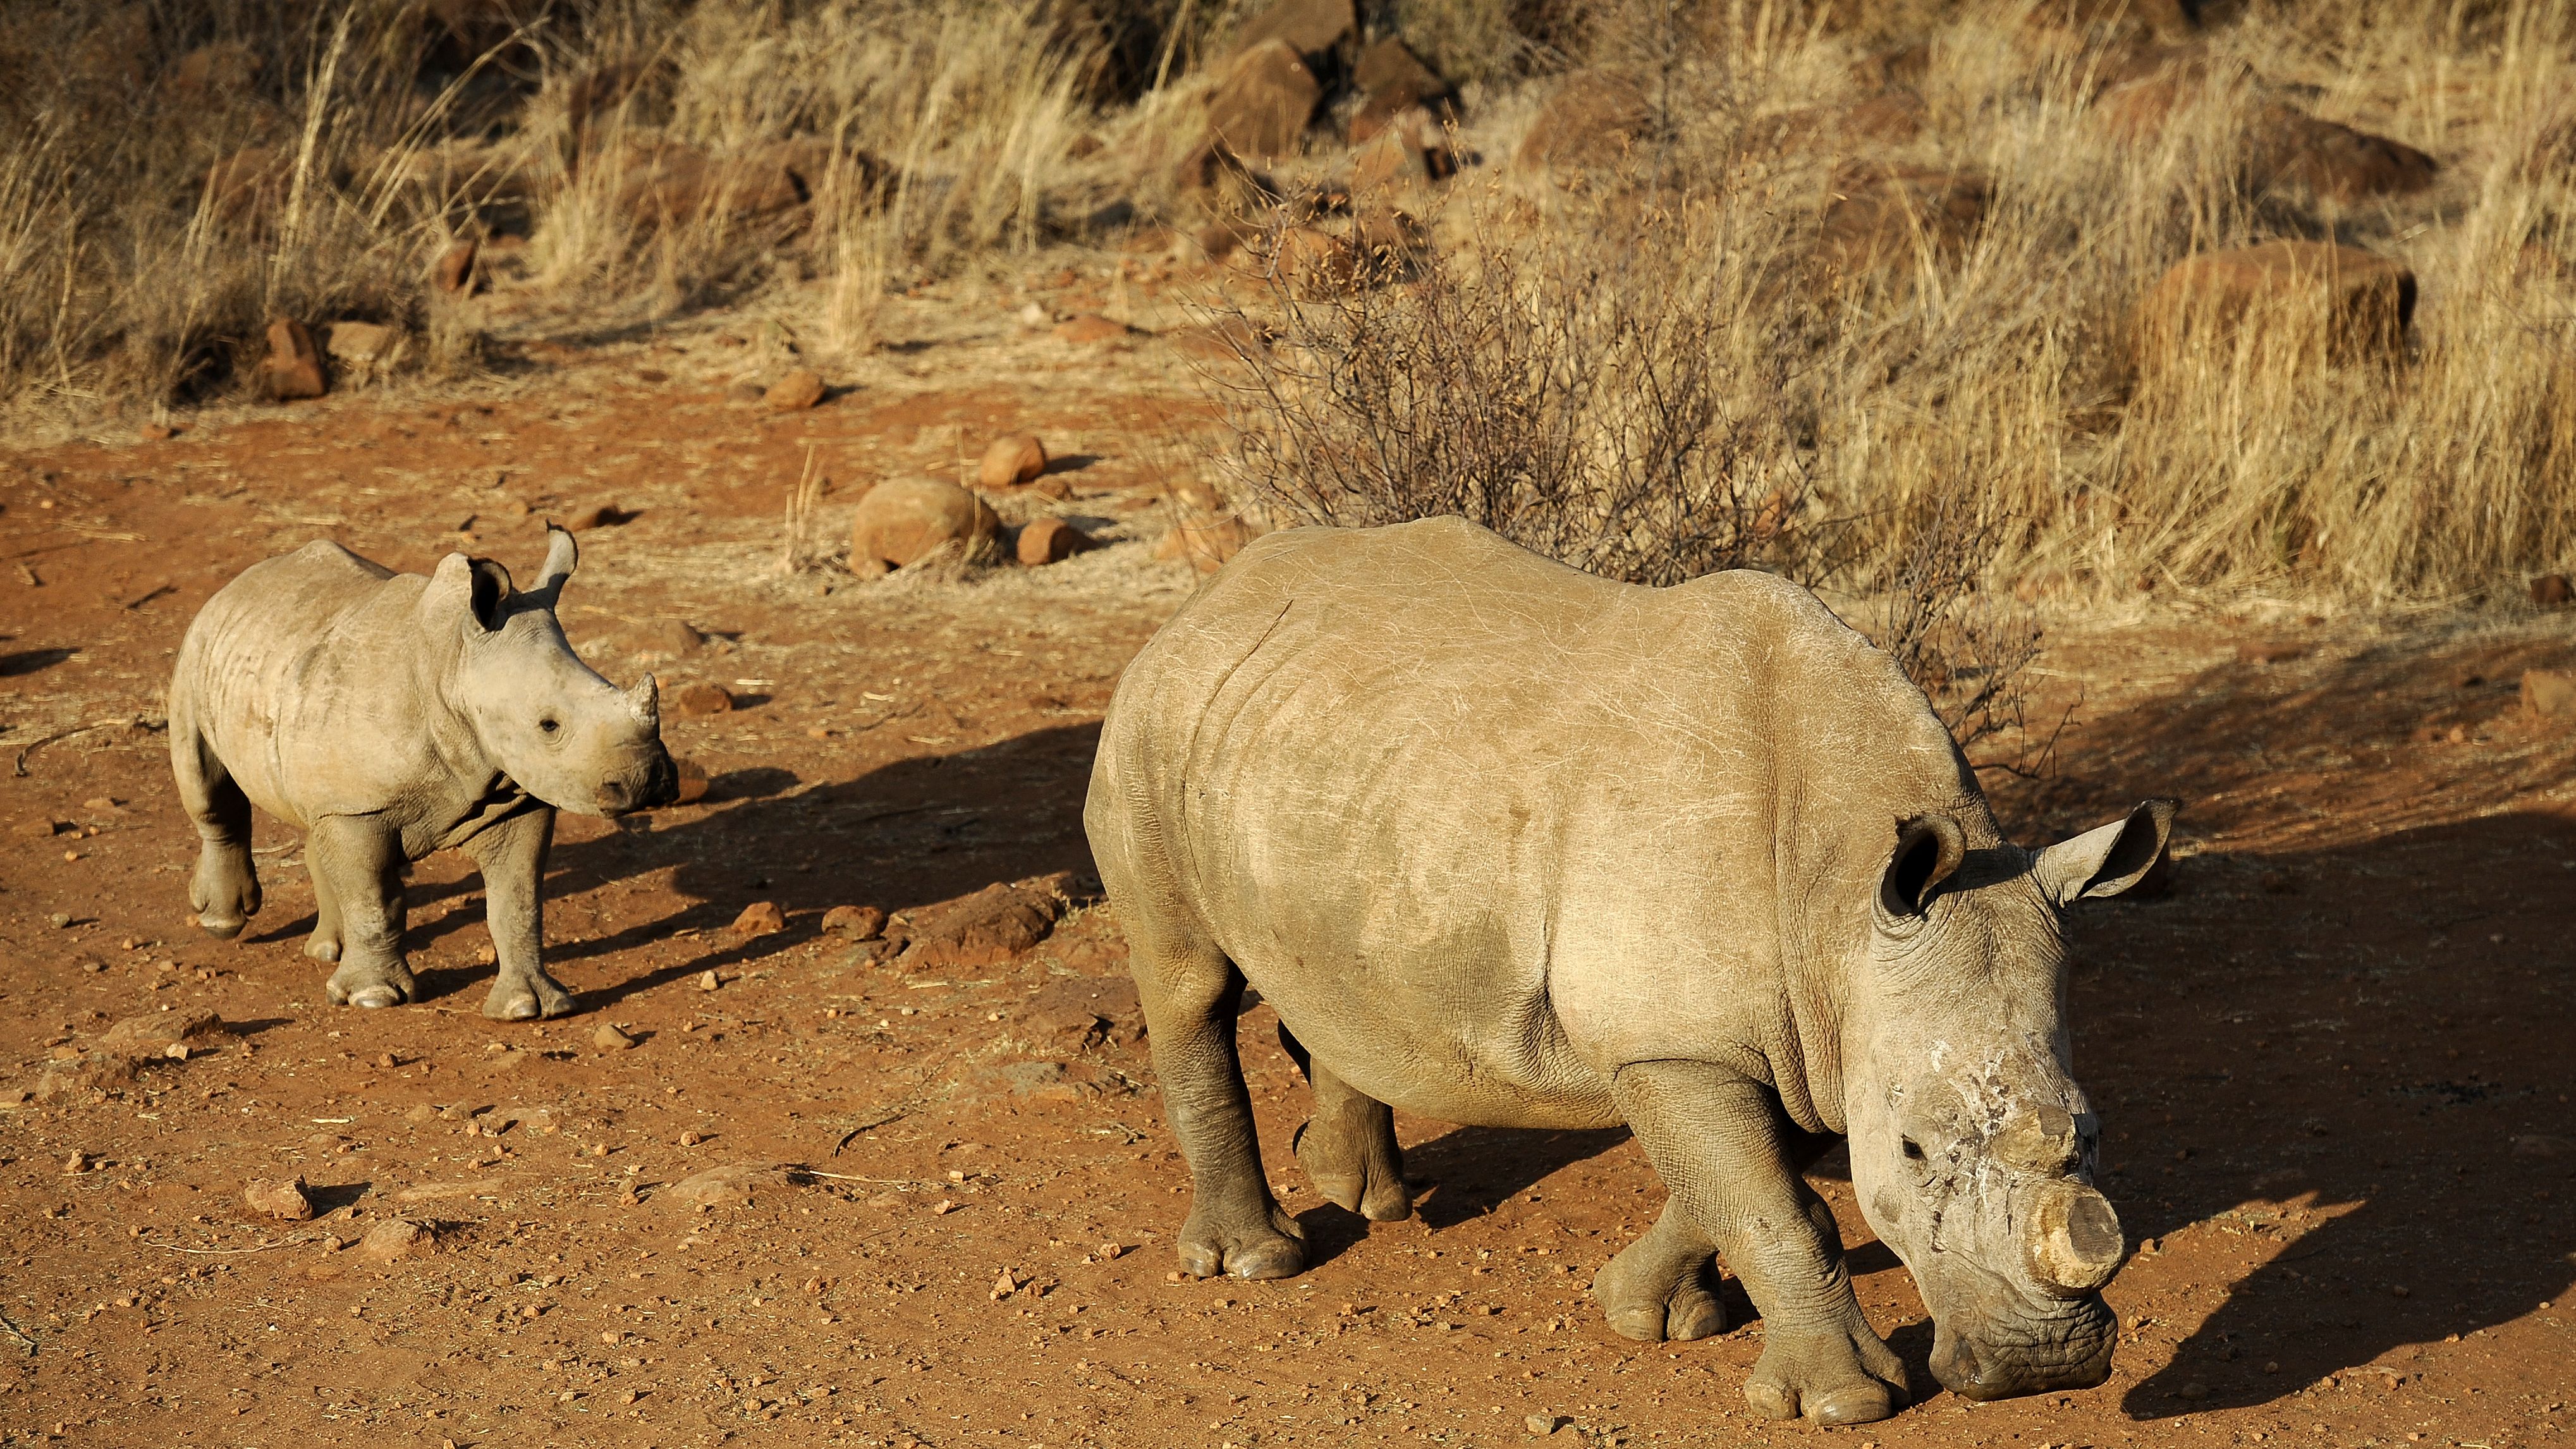 So far, 455 African rhinos have been killed this year for their horns based on a belief that they can cure cancer.